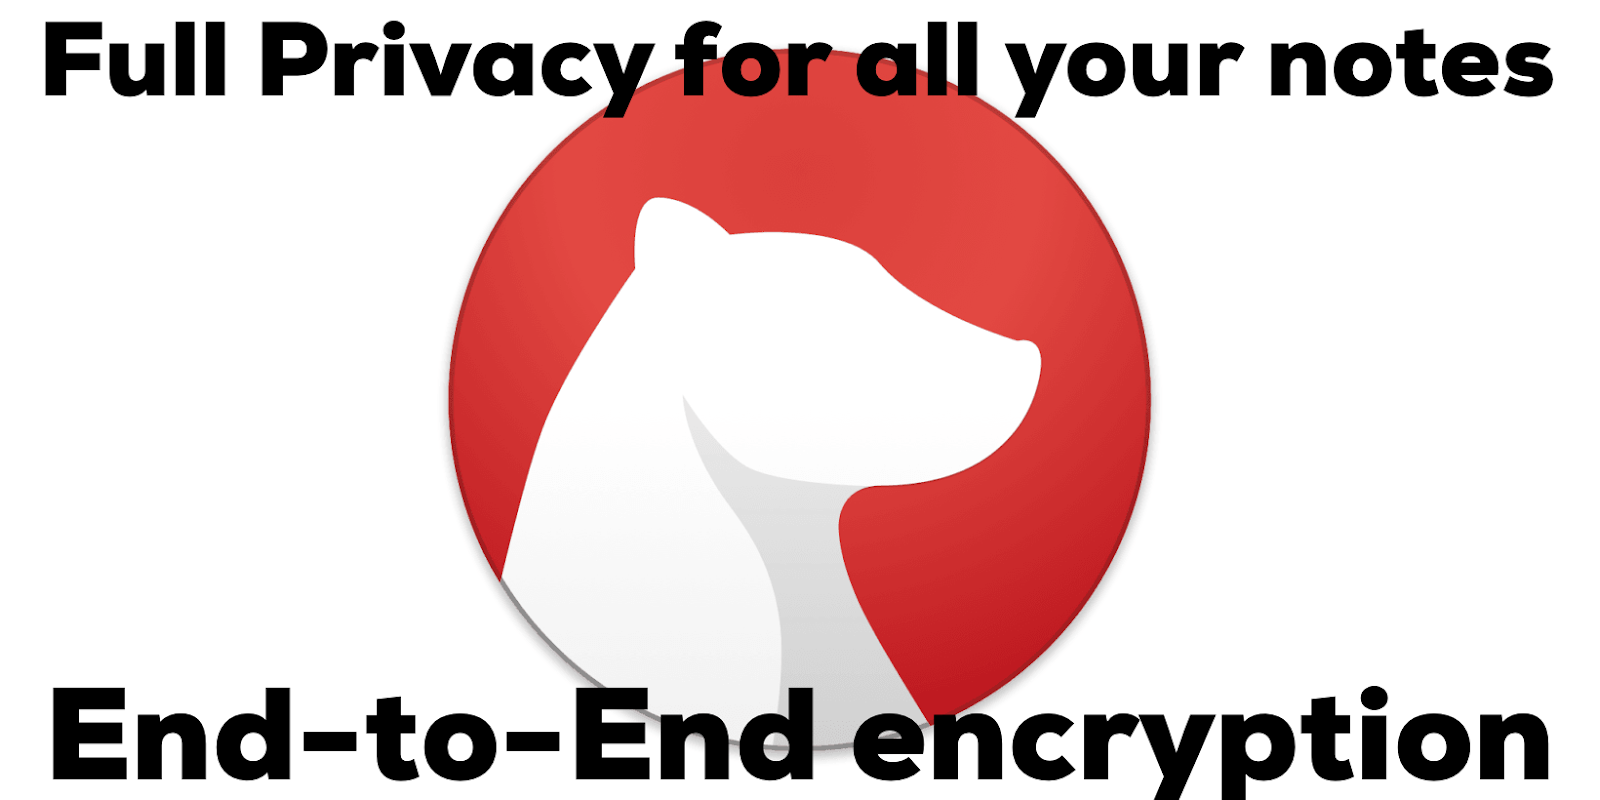 If you care about privacy you should use Bear app for all your notes and writings